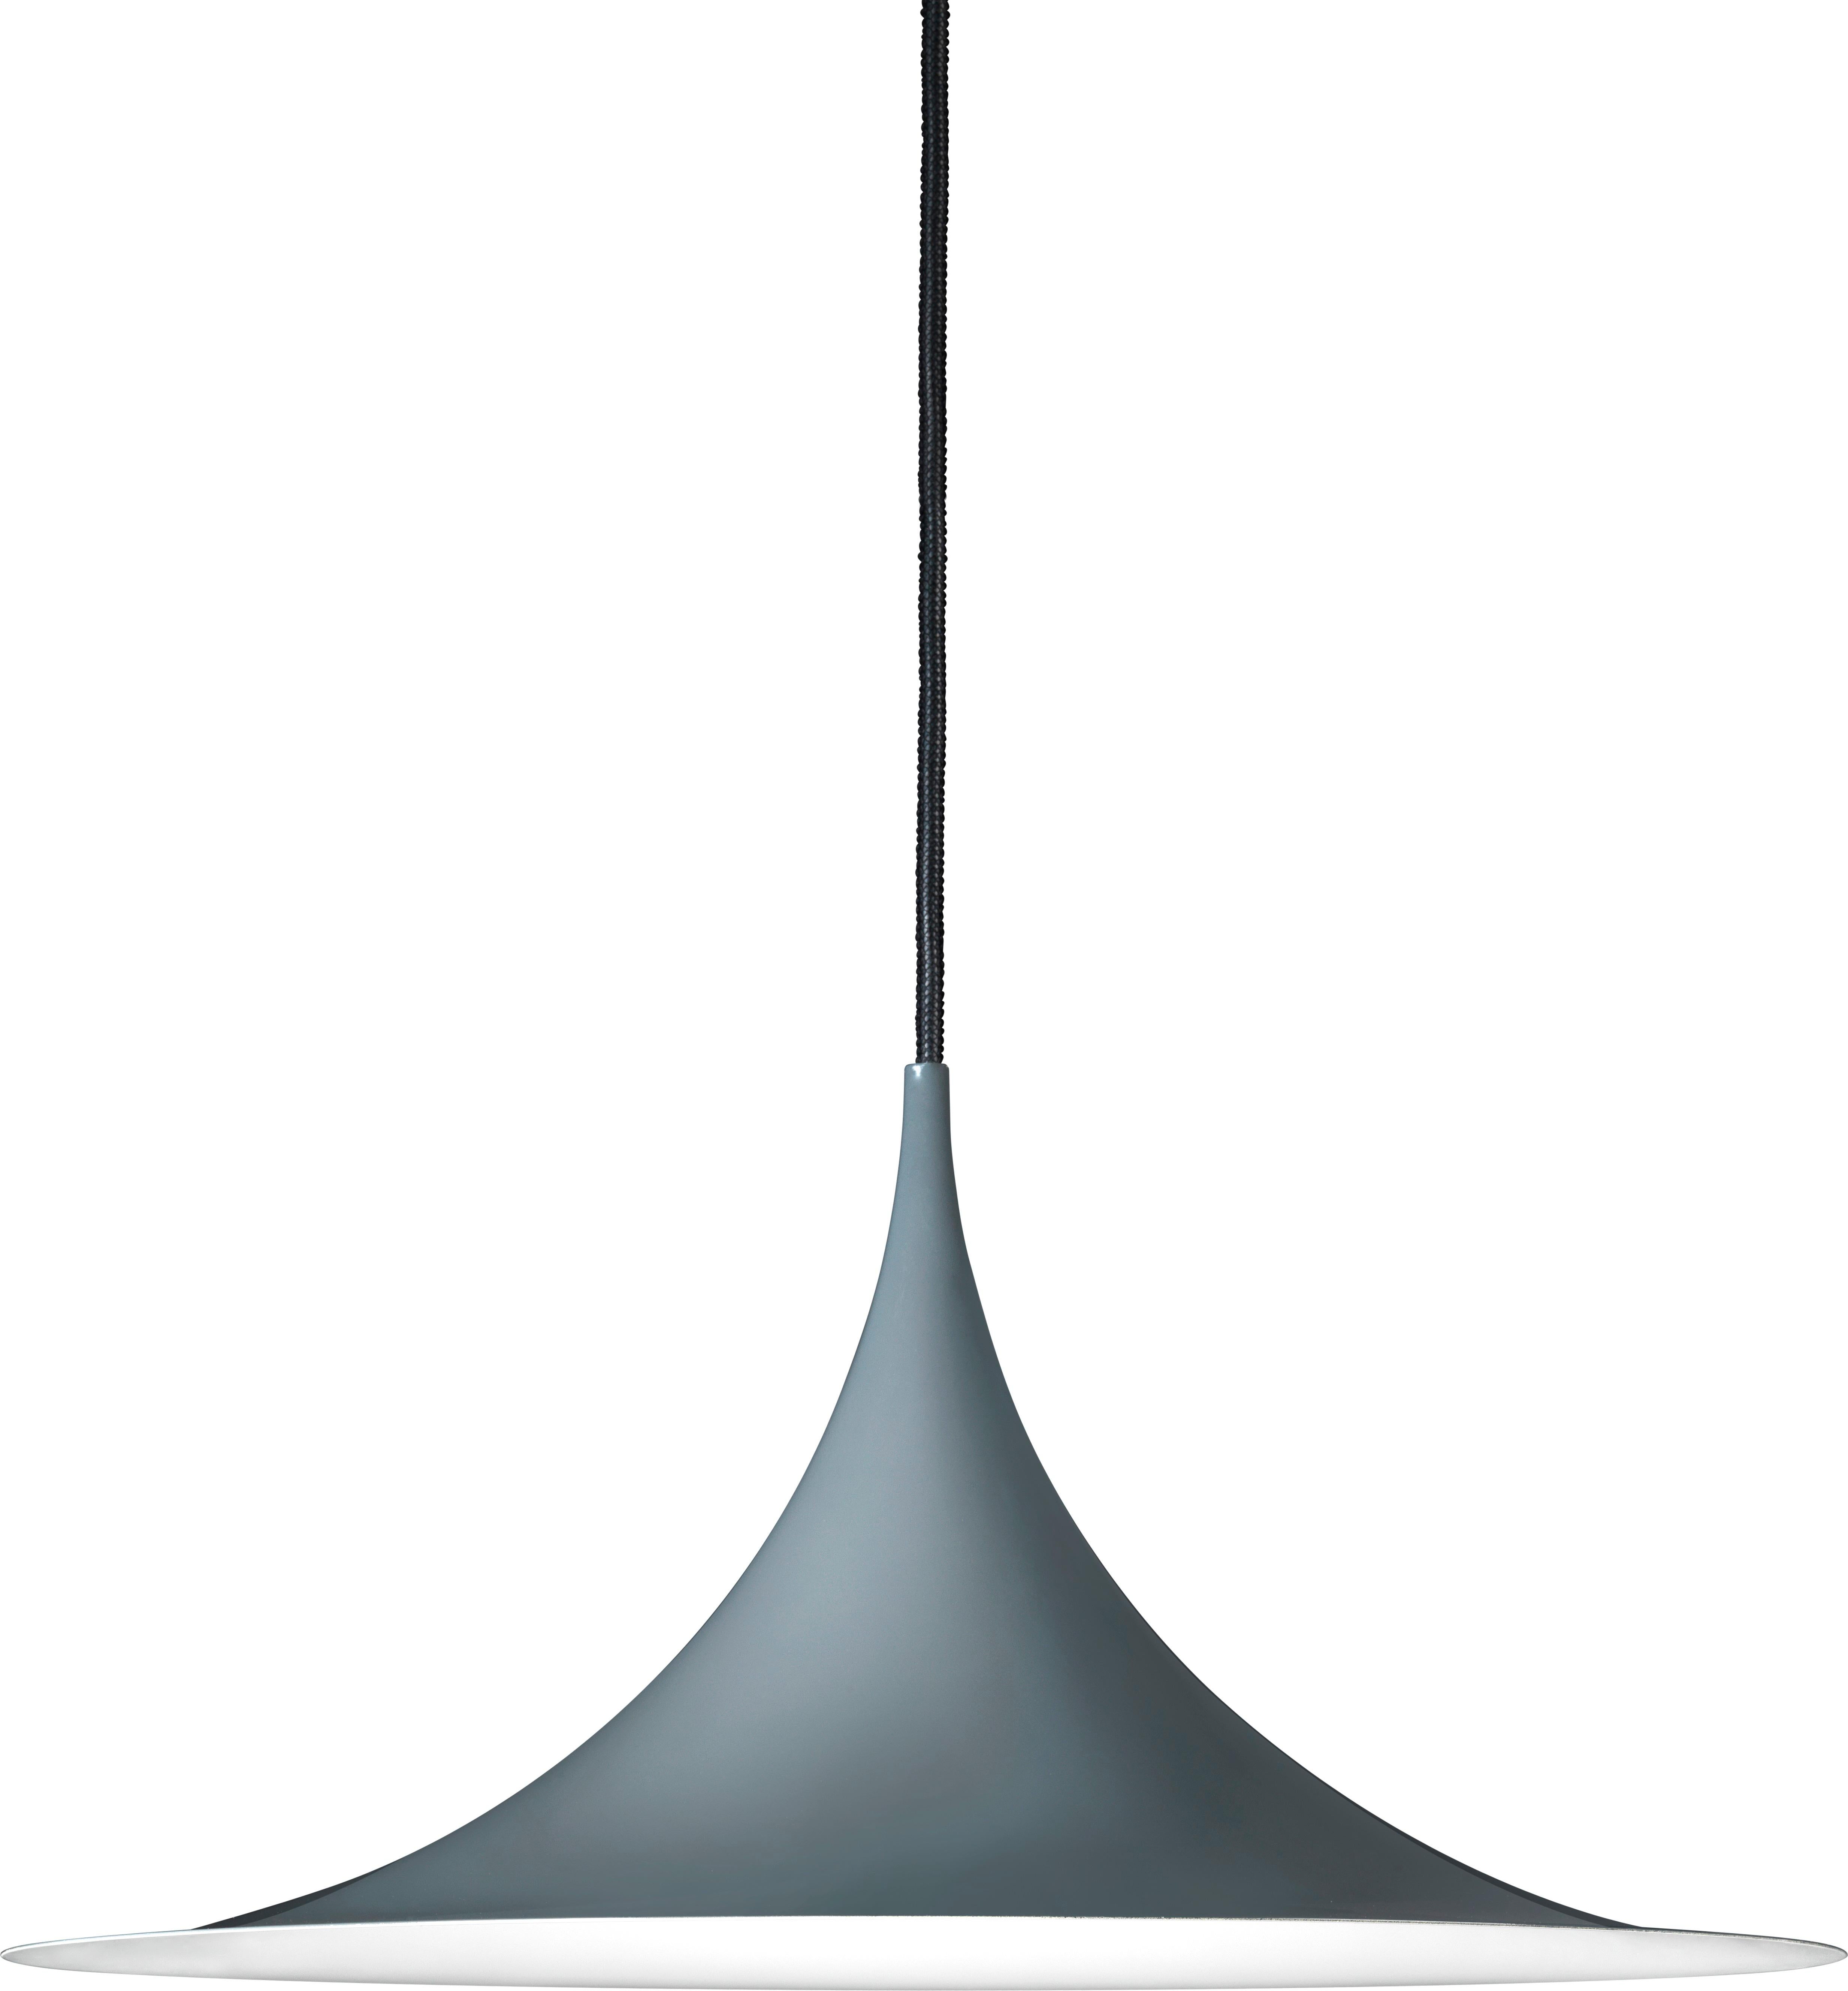 Painted Bonderup & Thorup 'Semi' Pendant in Anthracite Gray For Sale